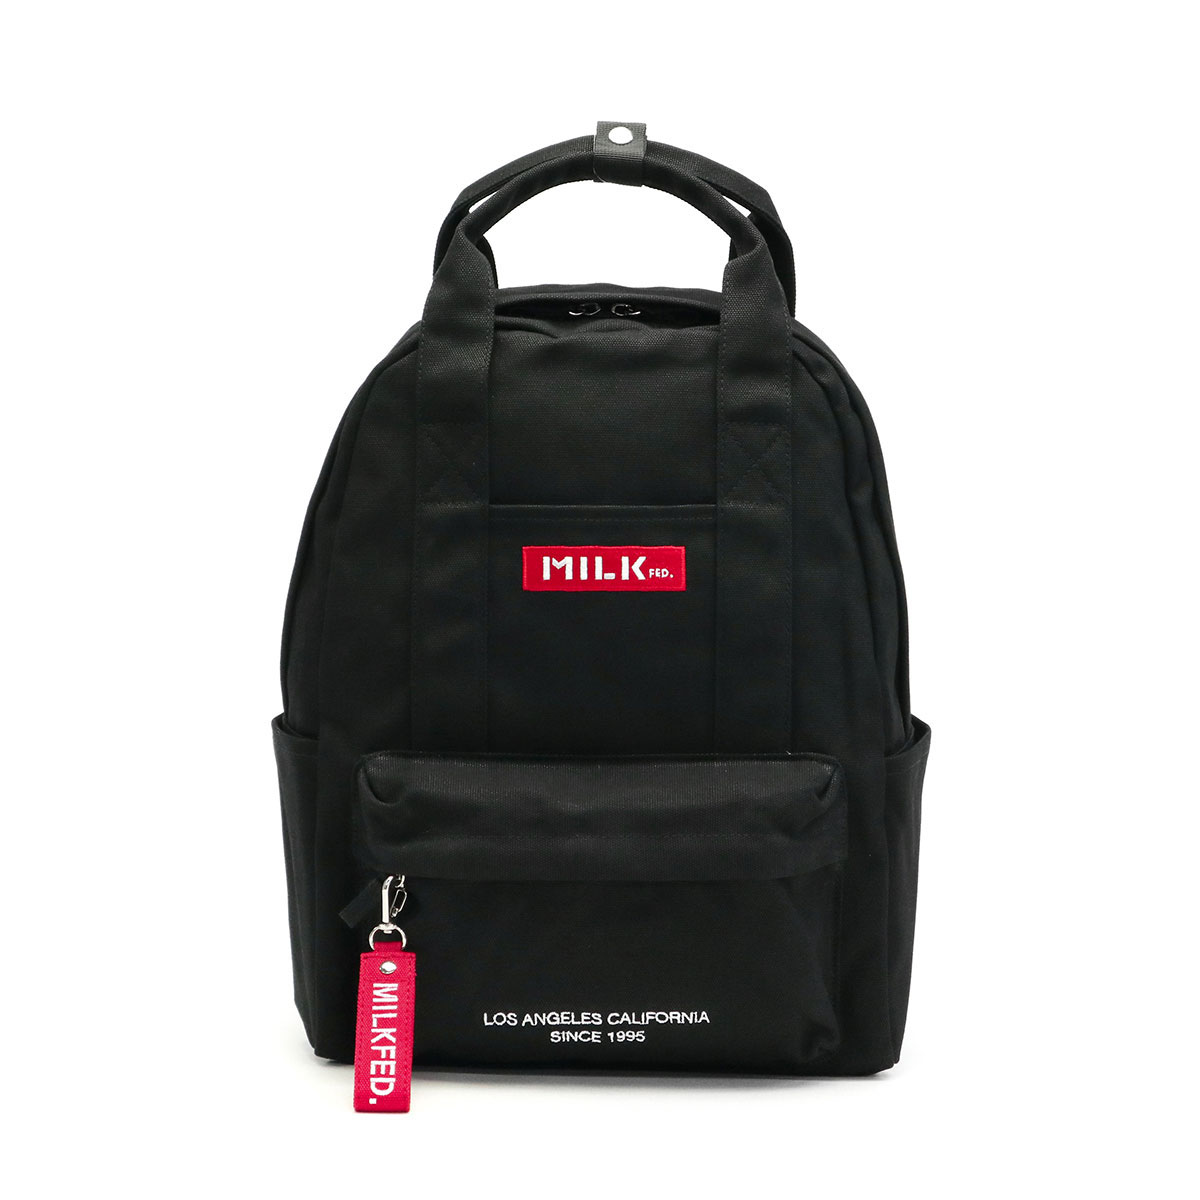 MILKFED. ミルクフェド EMBROIDERED BAR CANVAS BACKPACK バックパック ...